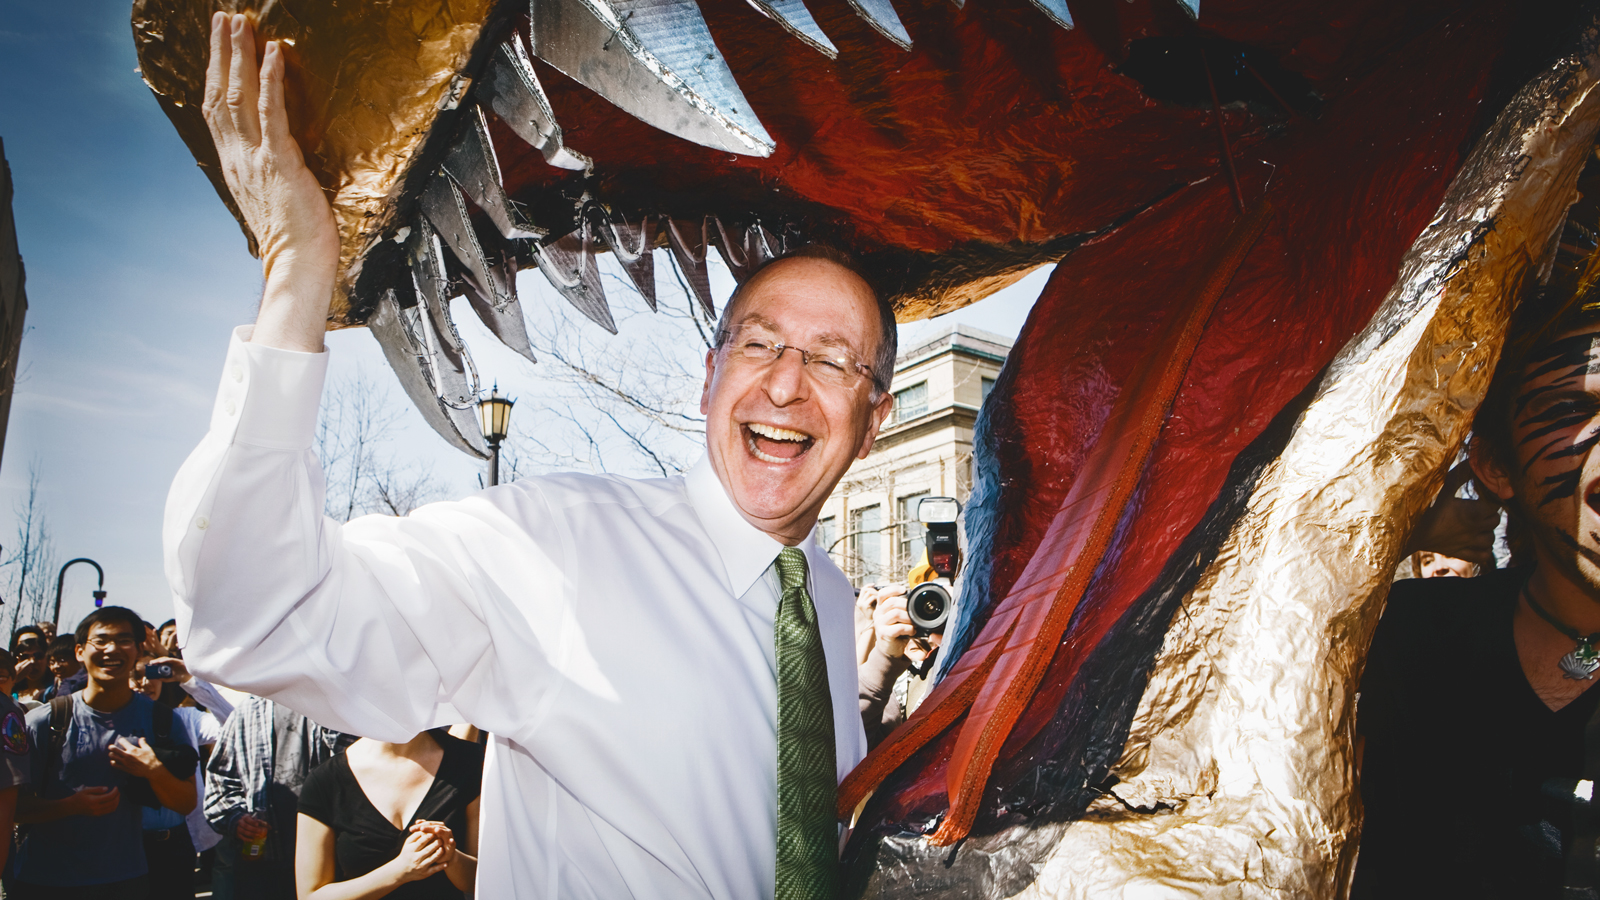 Then-president David Skorton poses in the mouth of the dragon in 2010